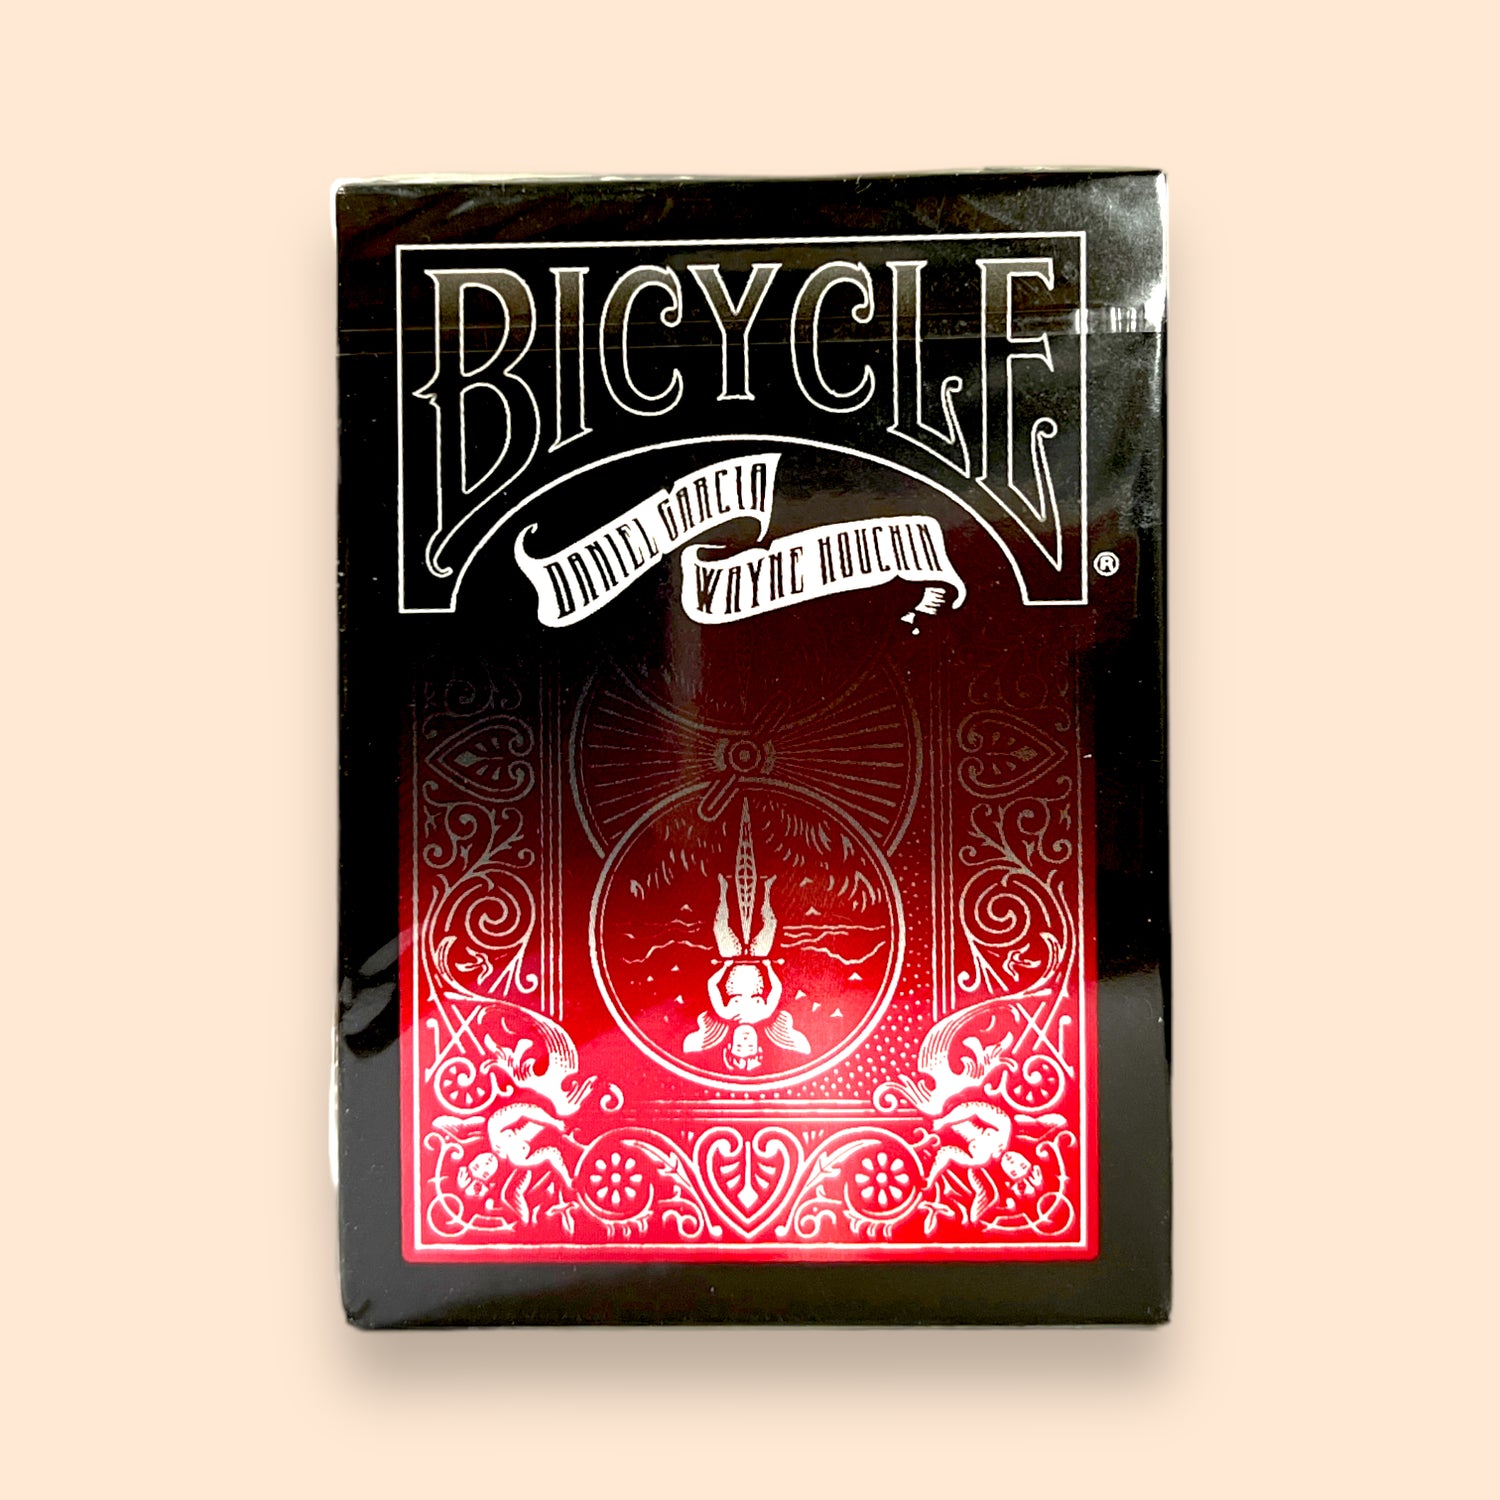 Bicycle Ultragaff playing cards by Ellusionist